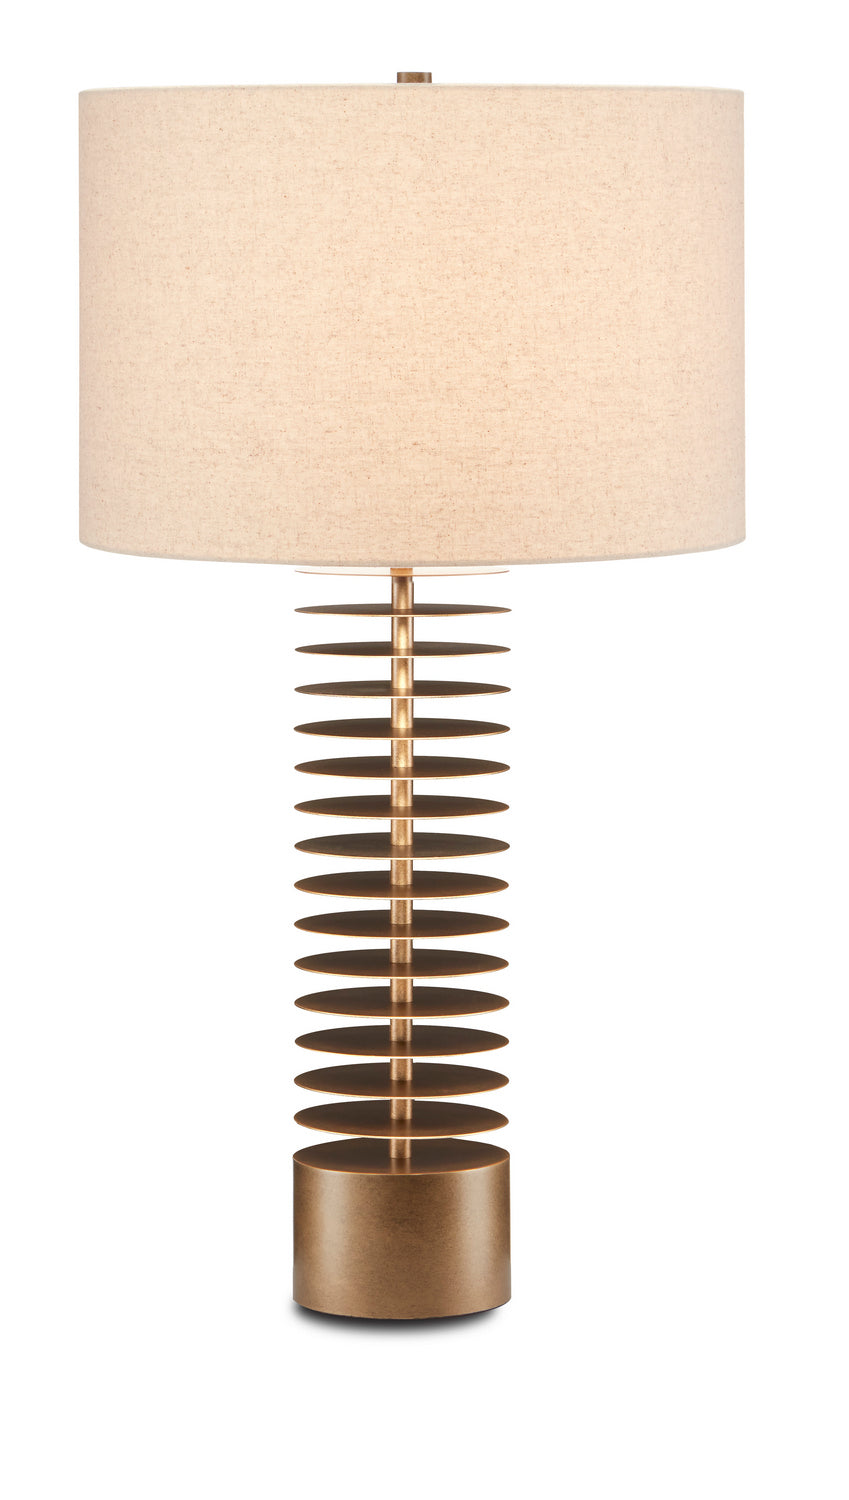 One Light Table Lamp from the Walwyn collection in Painted Antique Brass finish